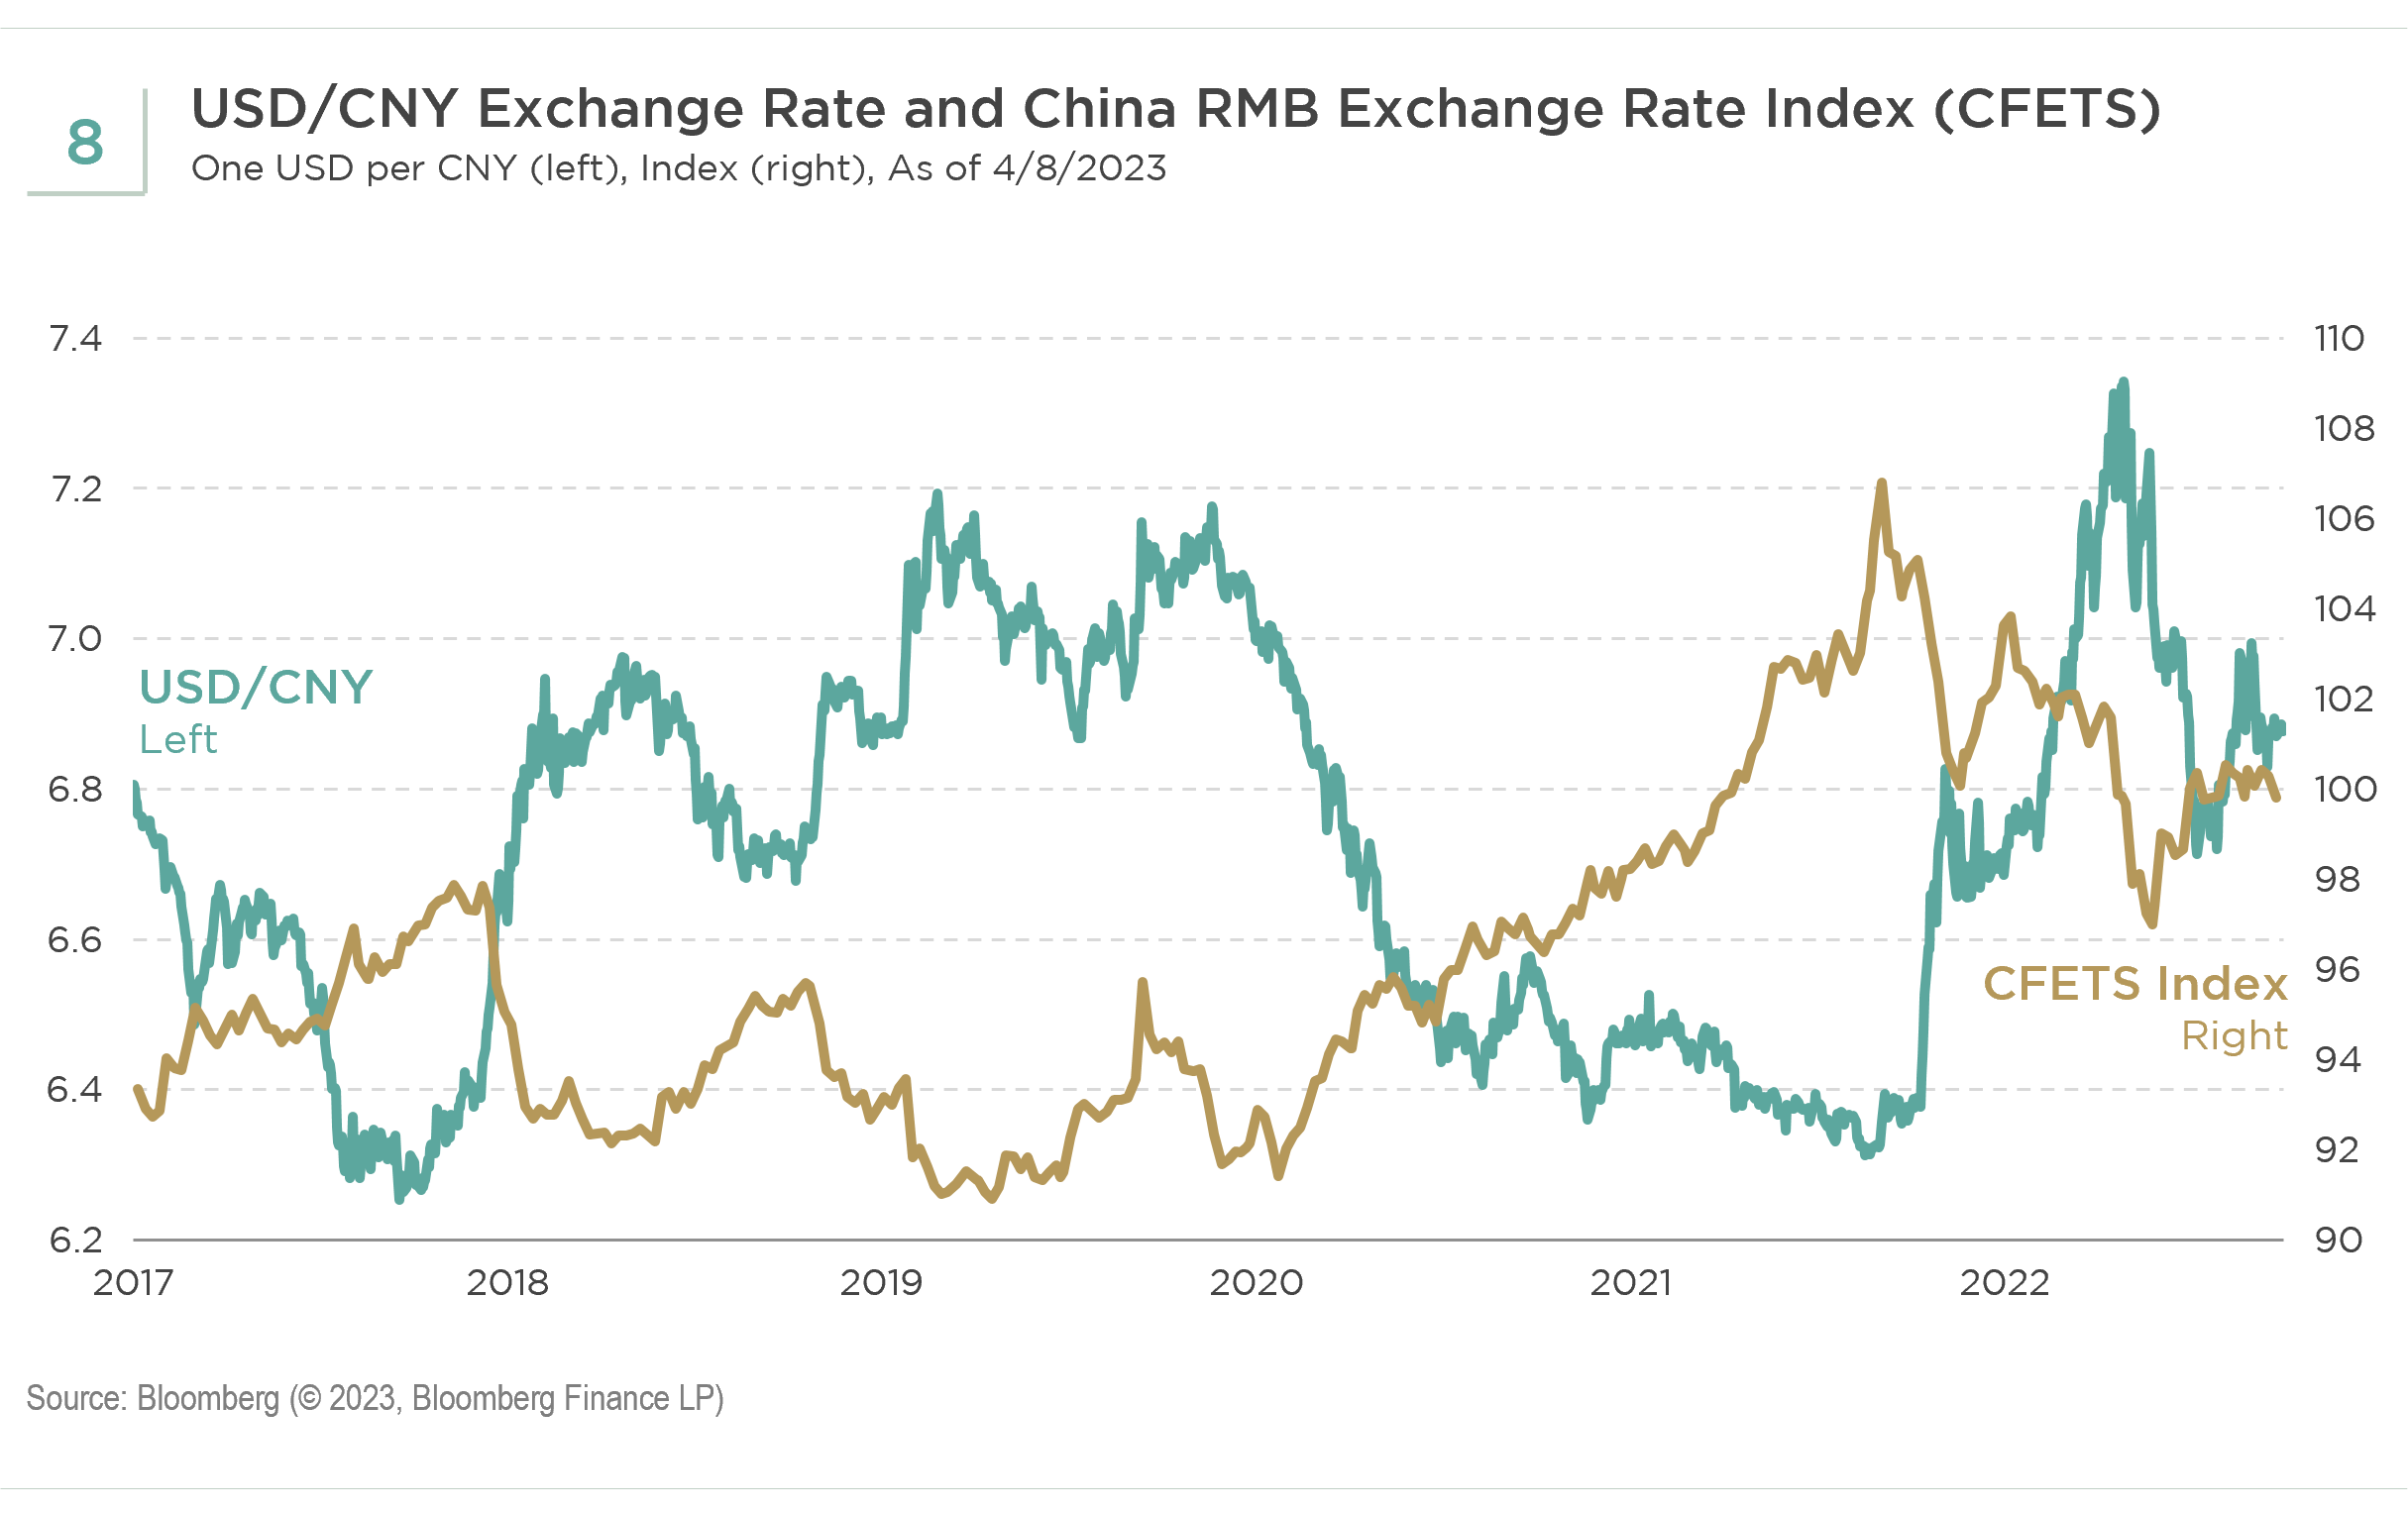 Exhibit 8: USDCNY and RMB vs CFETS Index